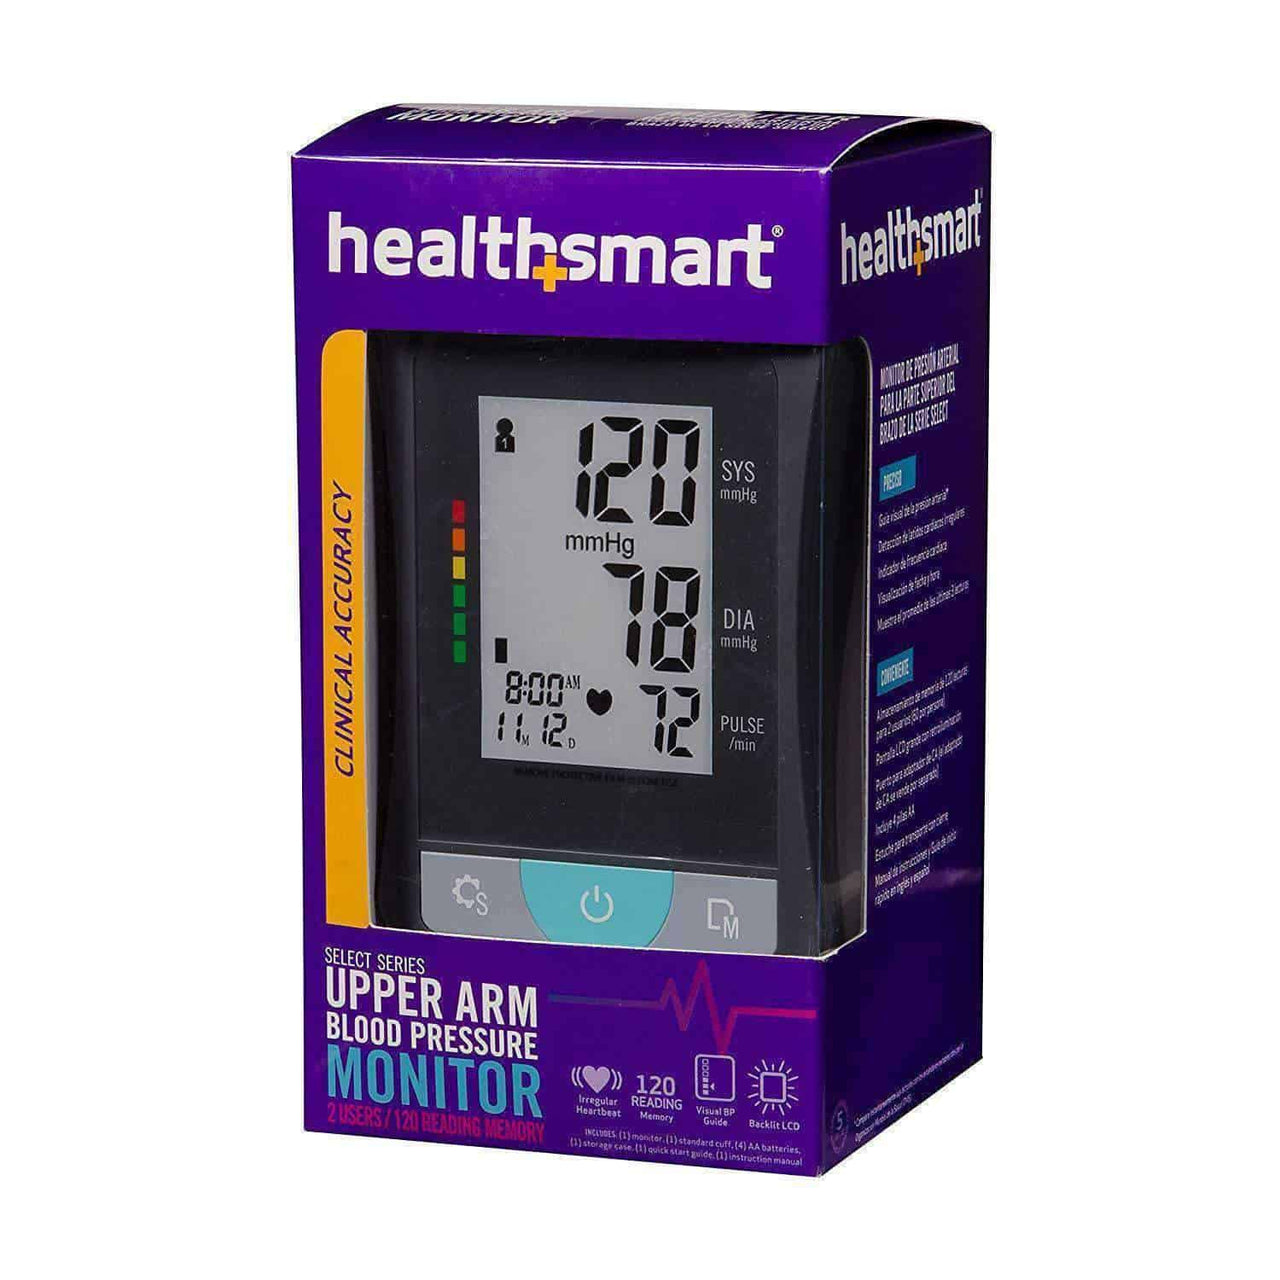 HealthSmart Blood Pressure Monitor for Upper Arm with Clinically Accurate LCD Screen - Senior.com Blood Pressure Monitors